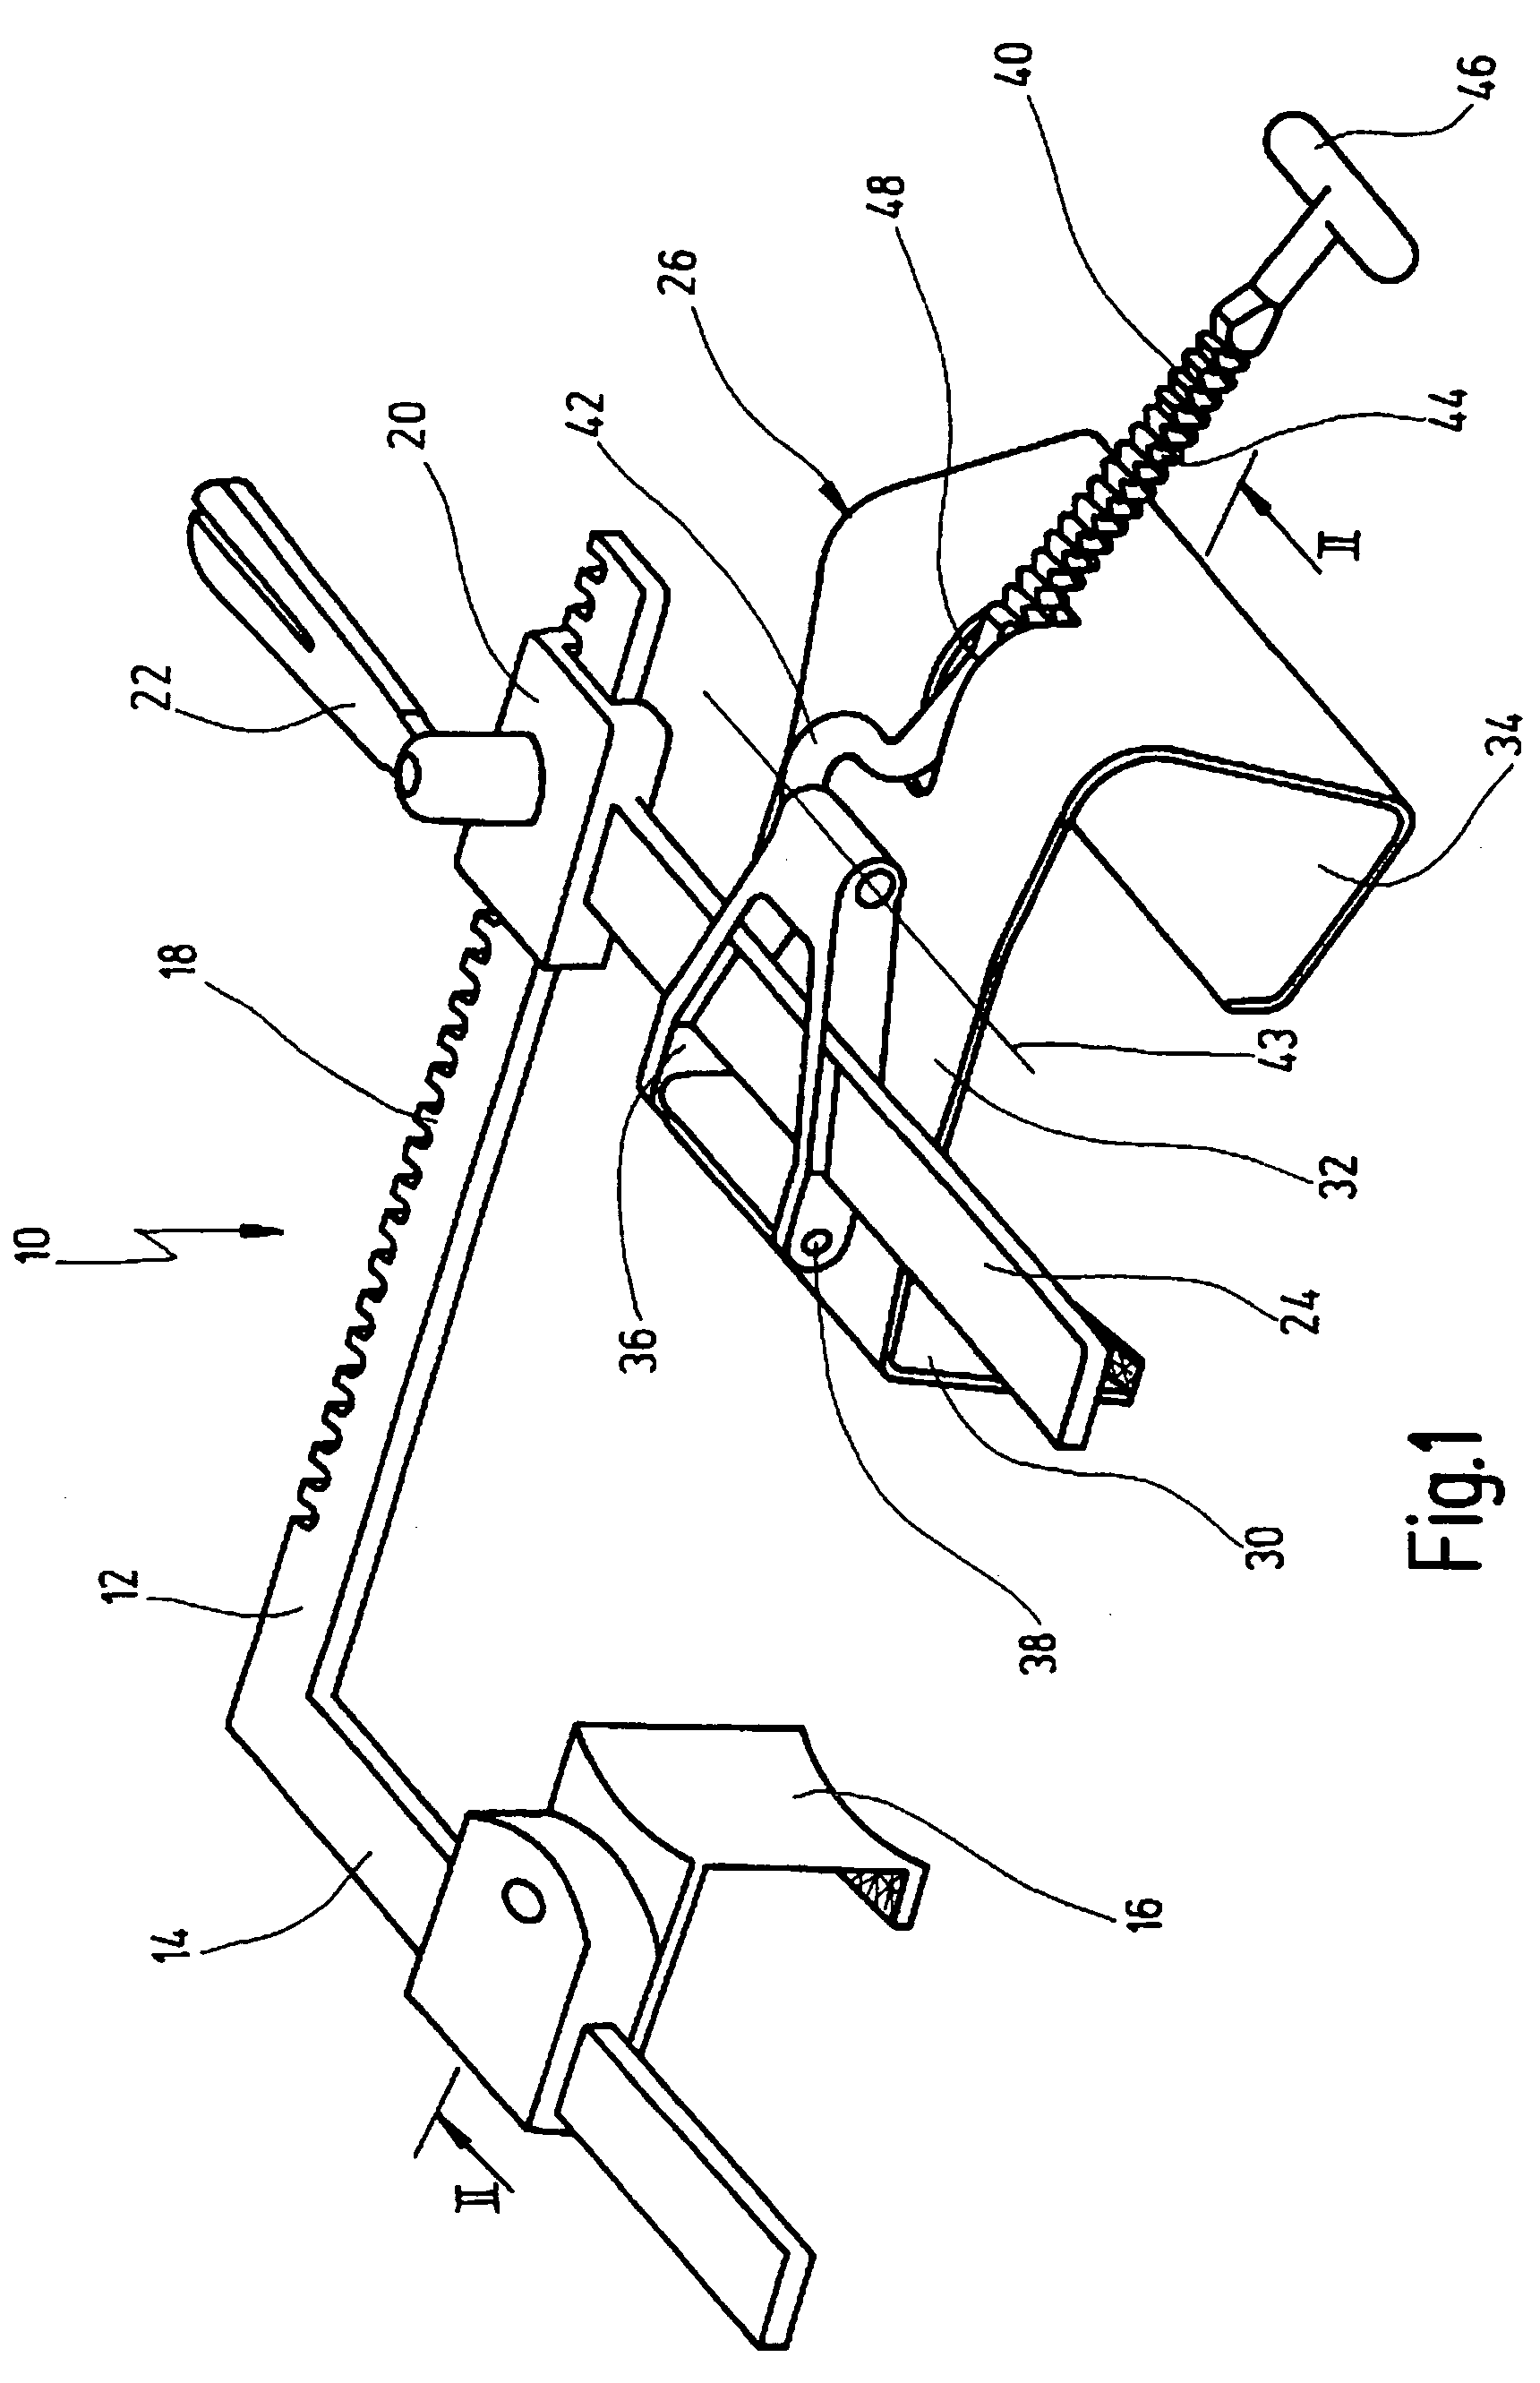 Retractor for performing heart and thorax surgeries